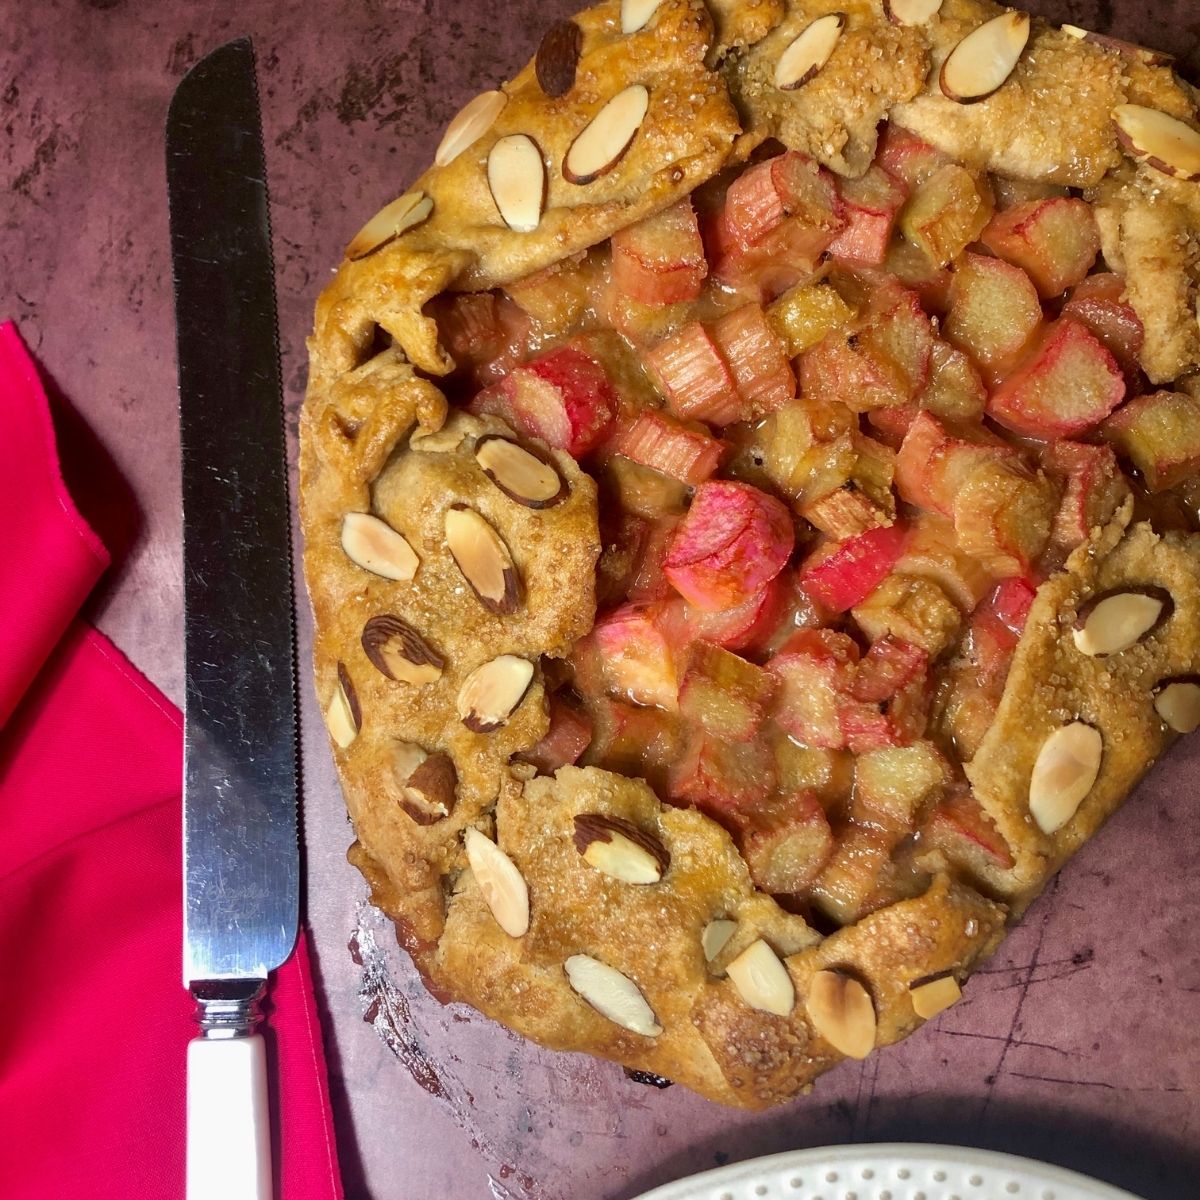 a rhubarb galette garnished with sliced almonds with a cranberry napkin and pearl handled knife to the side.